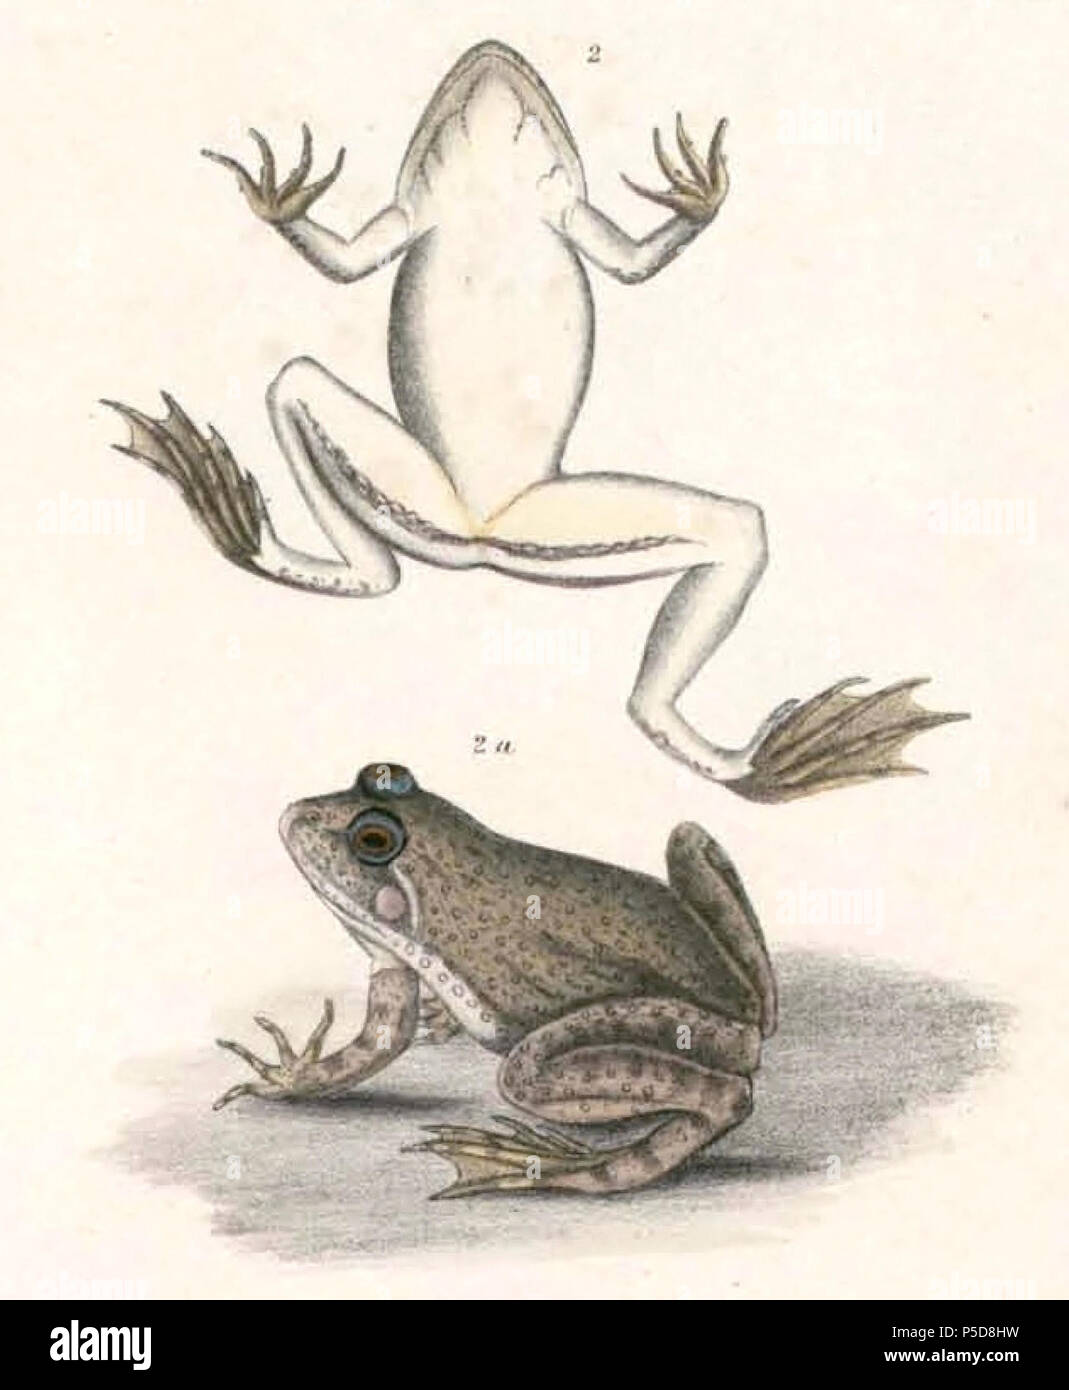 N/A.  English: « Rana bengalensis » = Euphlyctis cyanophlyctis (Indian Skipper Frog) Français: « Rana bengalensis » = Euphlyctis cyanophlyctis . between 1830 and 1832.   Thomas Hardwicke  (1755–1835)     Alternative names Hardw.  Description English soldier and naturalist  Date of birth/death 1755 3 May 1835  Location of birth/death London Borough of Lambeth  Authority control  : Q2543258 VIAF:308180676 LCCN:nb2013018703 Botanist:Hardw. SUDOC:183009134 WorldCat 535 Euphlyctis cyanophlyctis Hardwicke Stock Photo